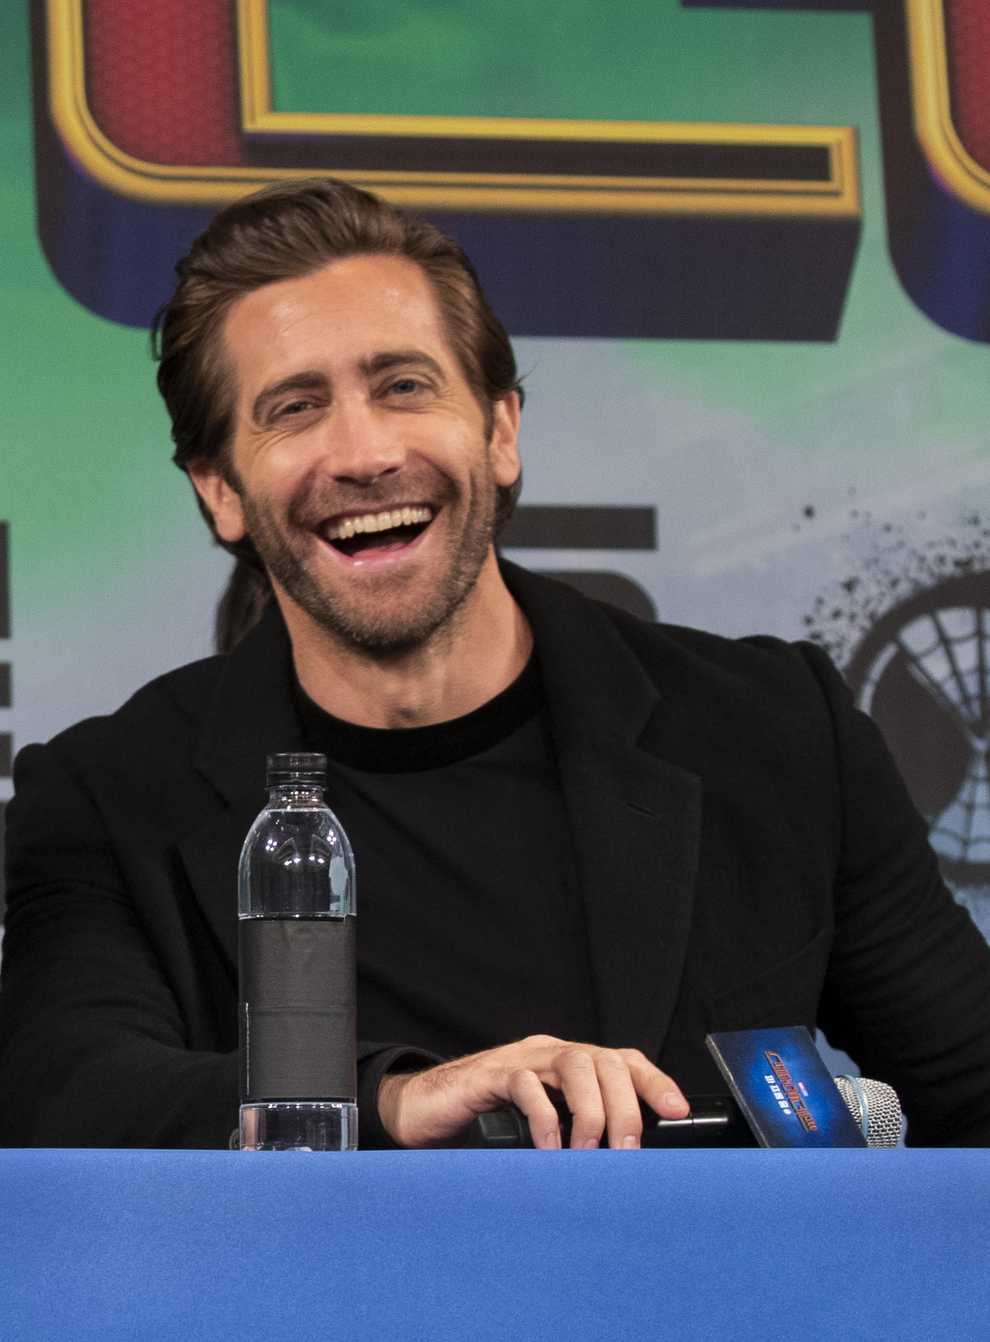 Holland nominated Gyllenhaal to do the handstand challenge (PA Images)